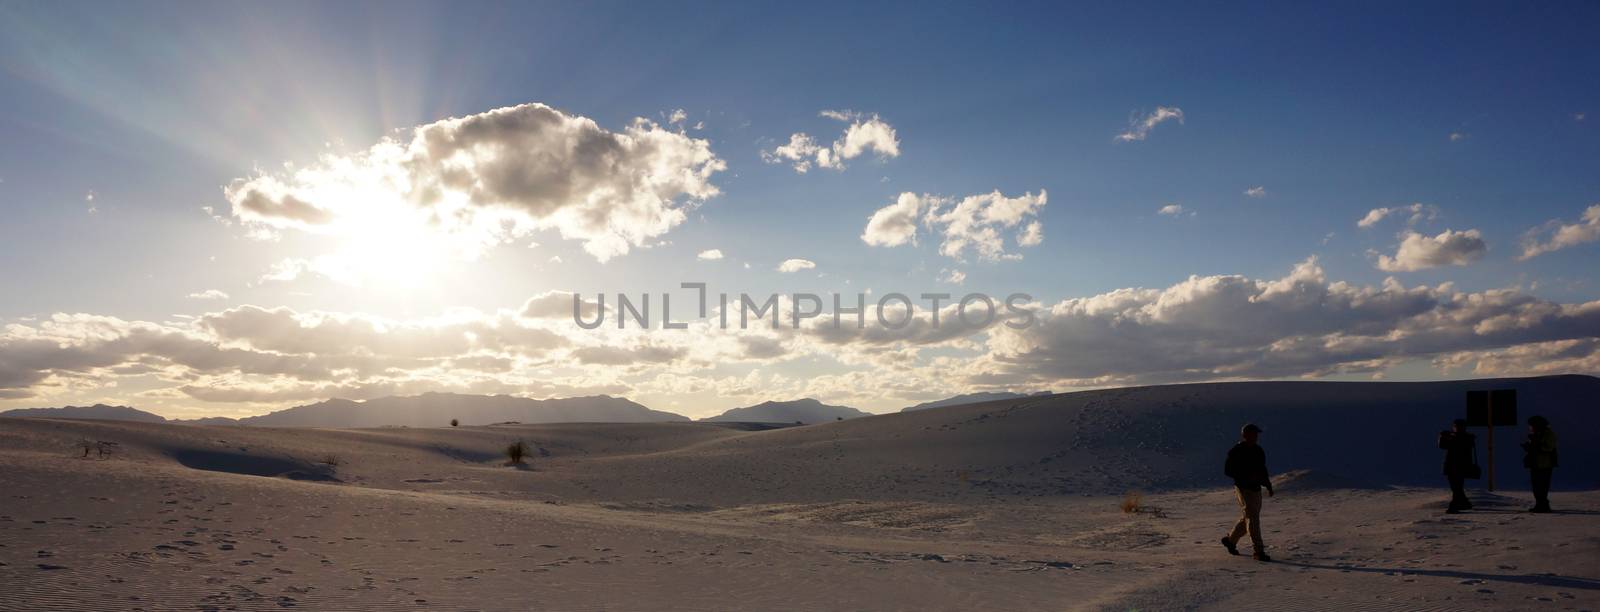 White Sands, New Mexico by tang90246